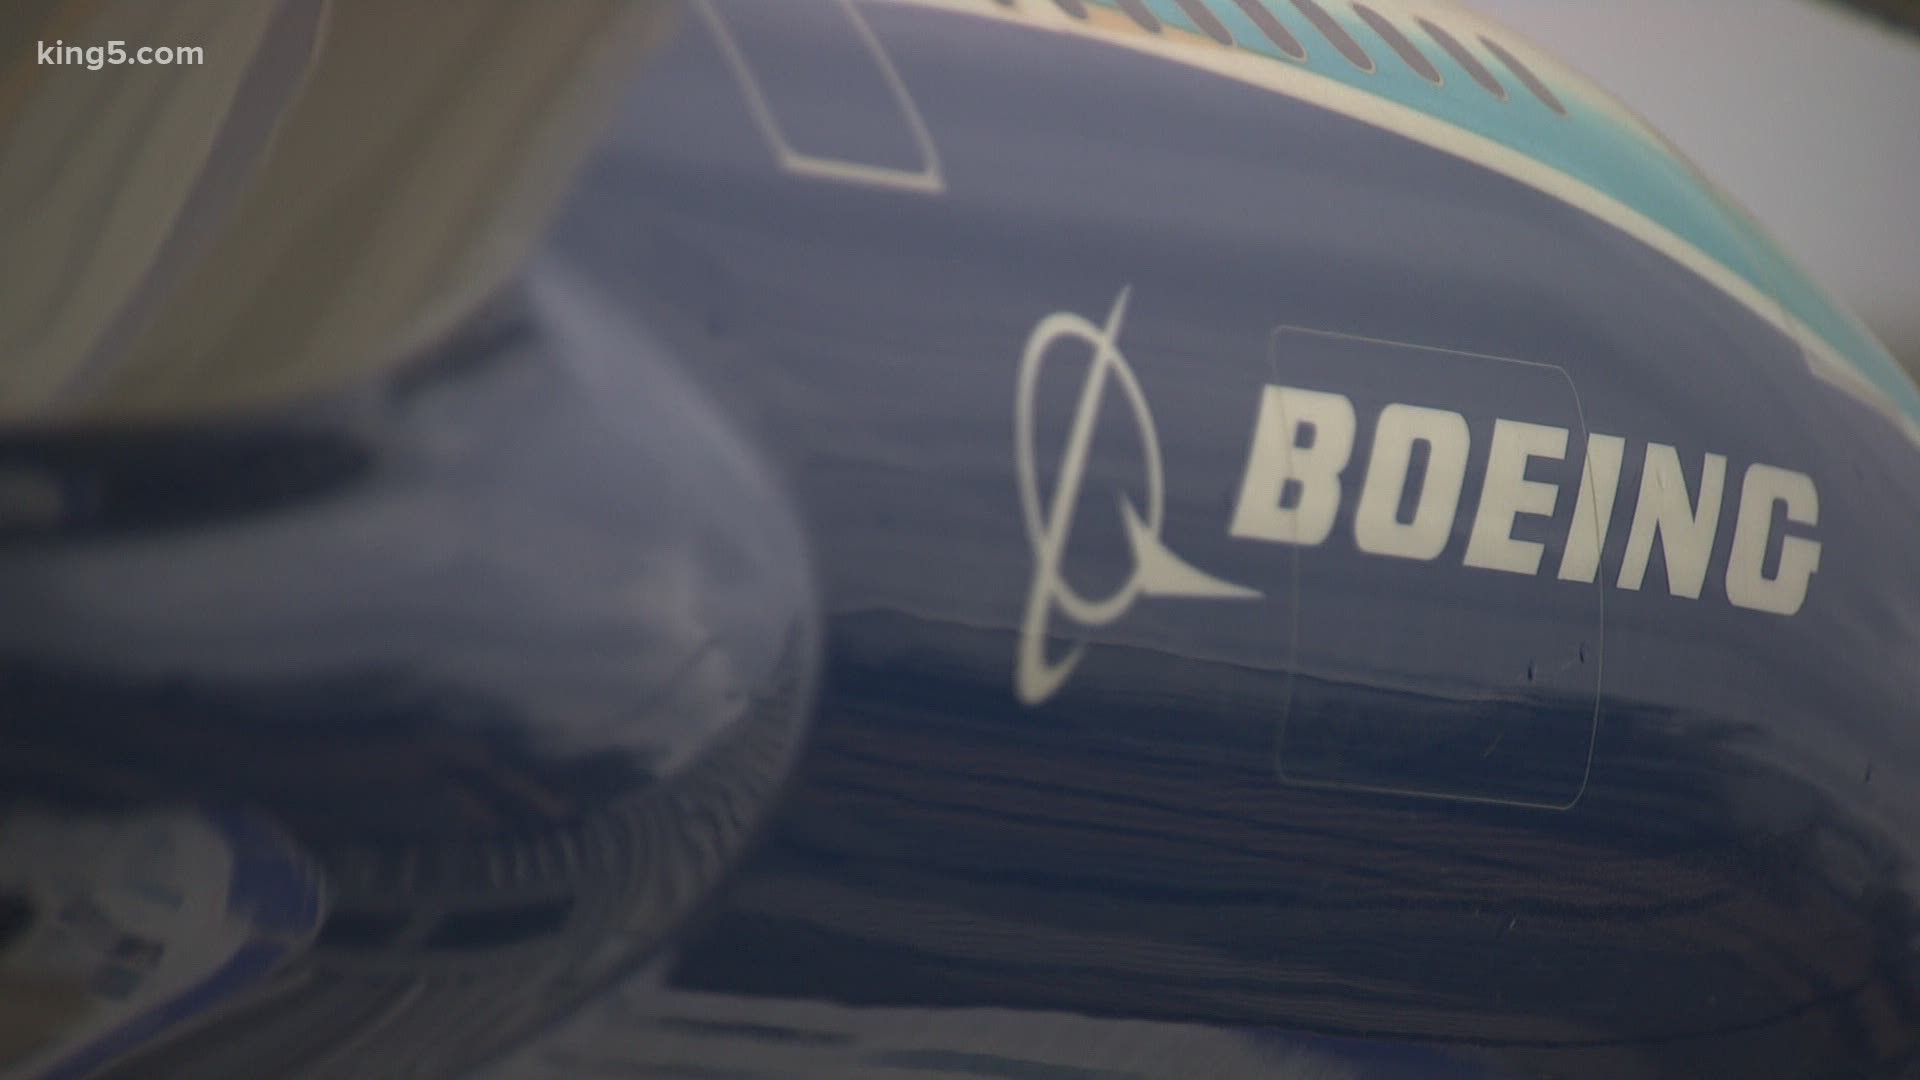 For Boeing, the pandemic is compounding problems that began with its 737 MAX airliner, which remains grounded after two crashes killed 346 people.